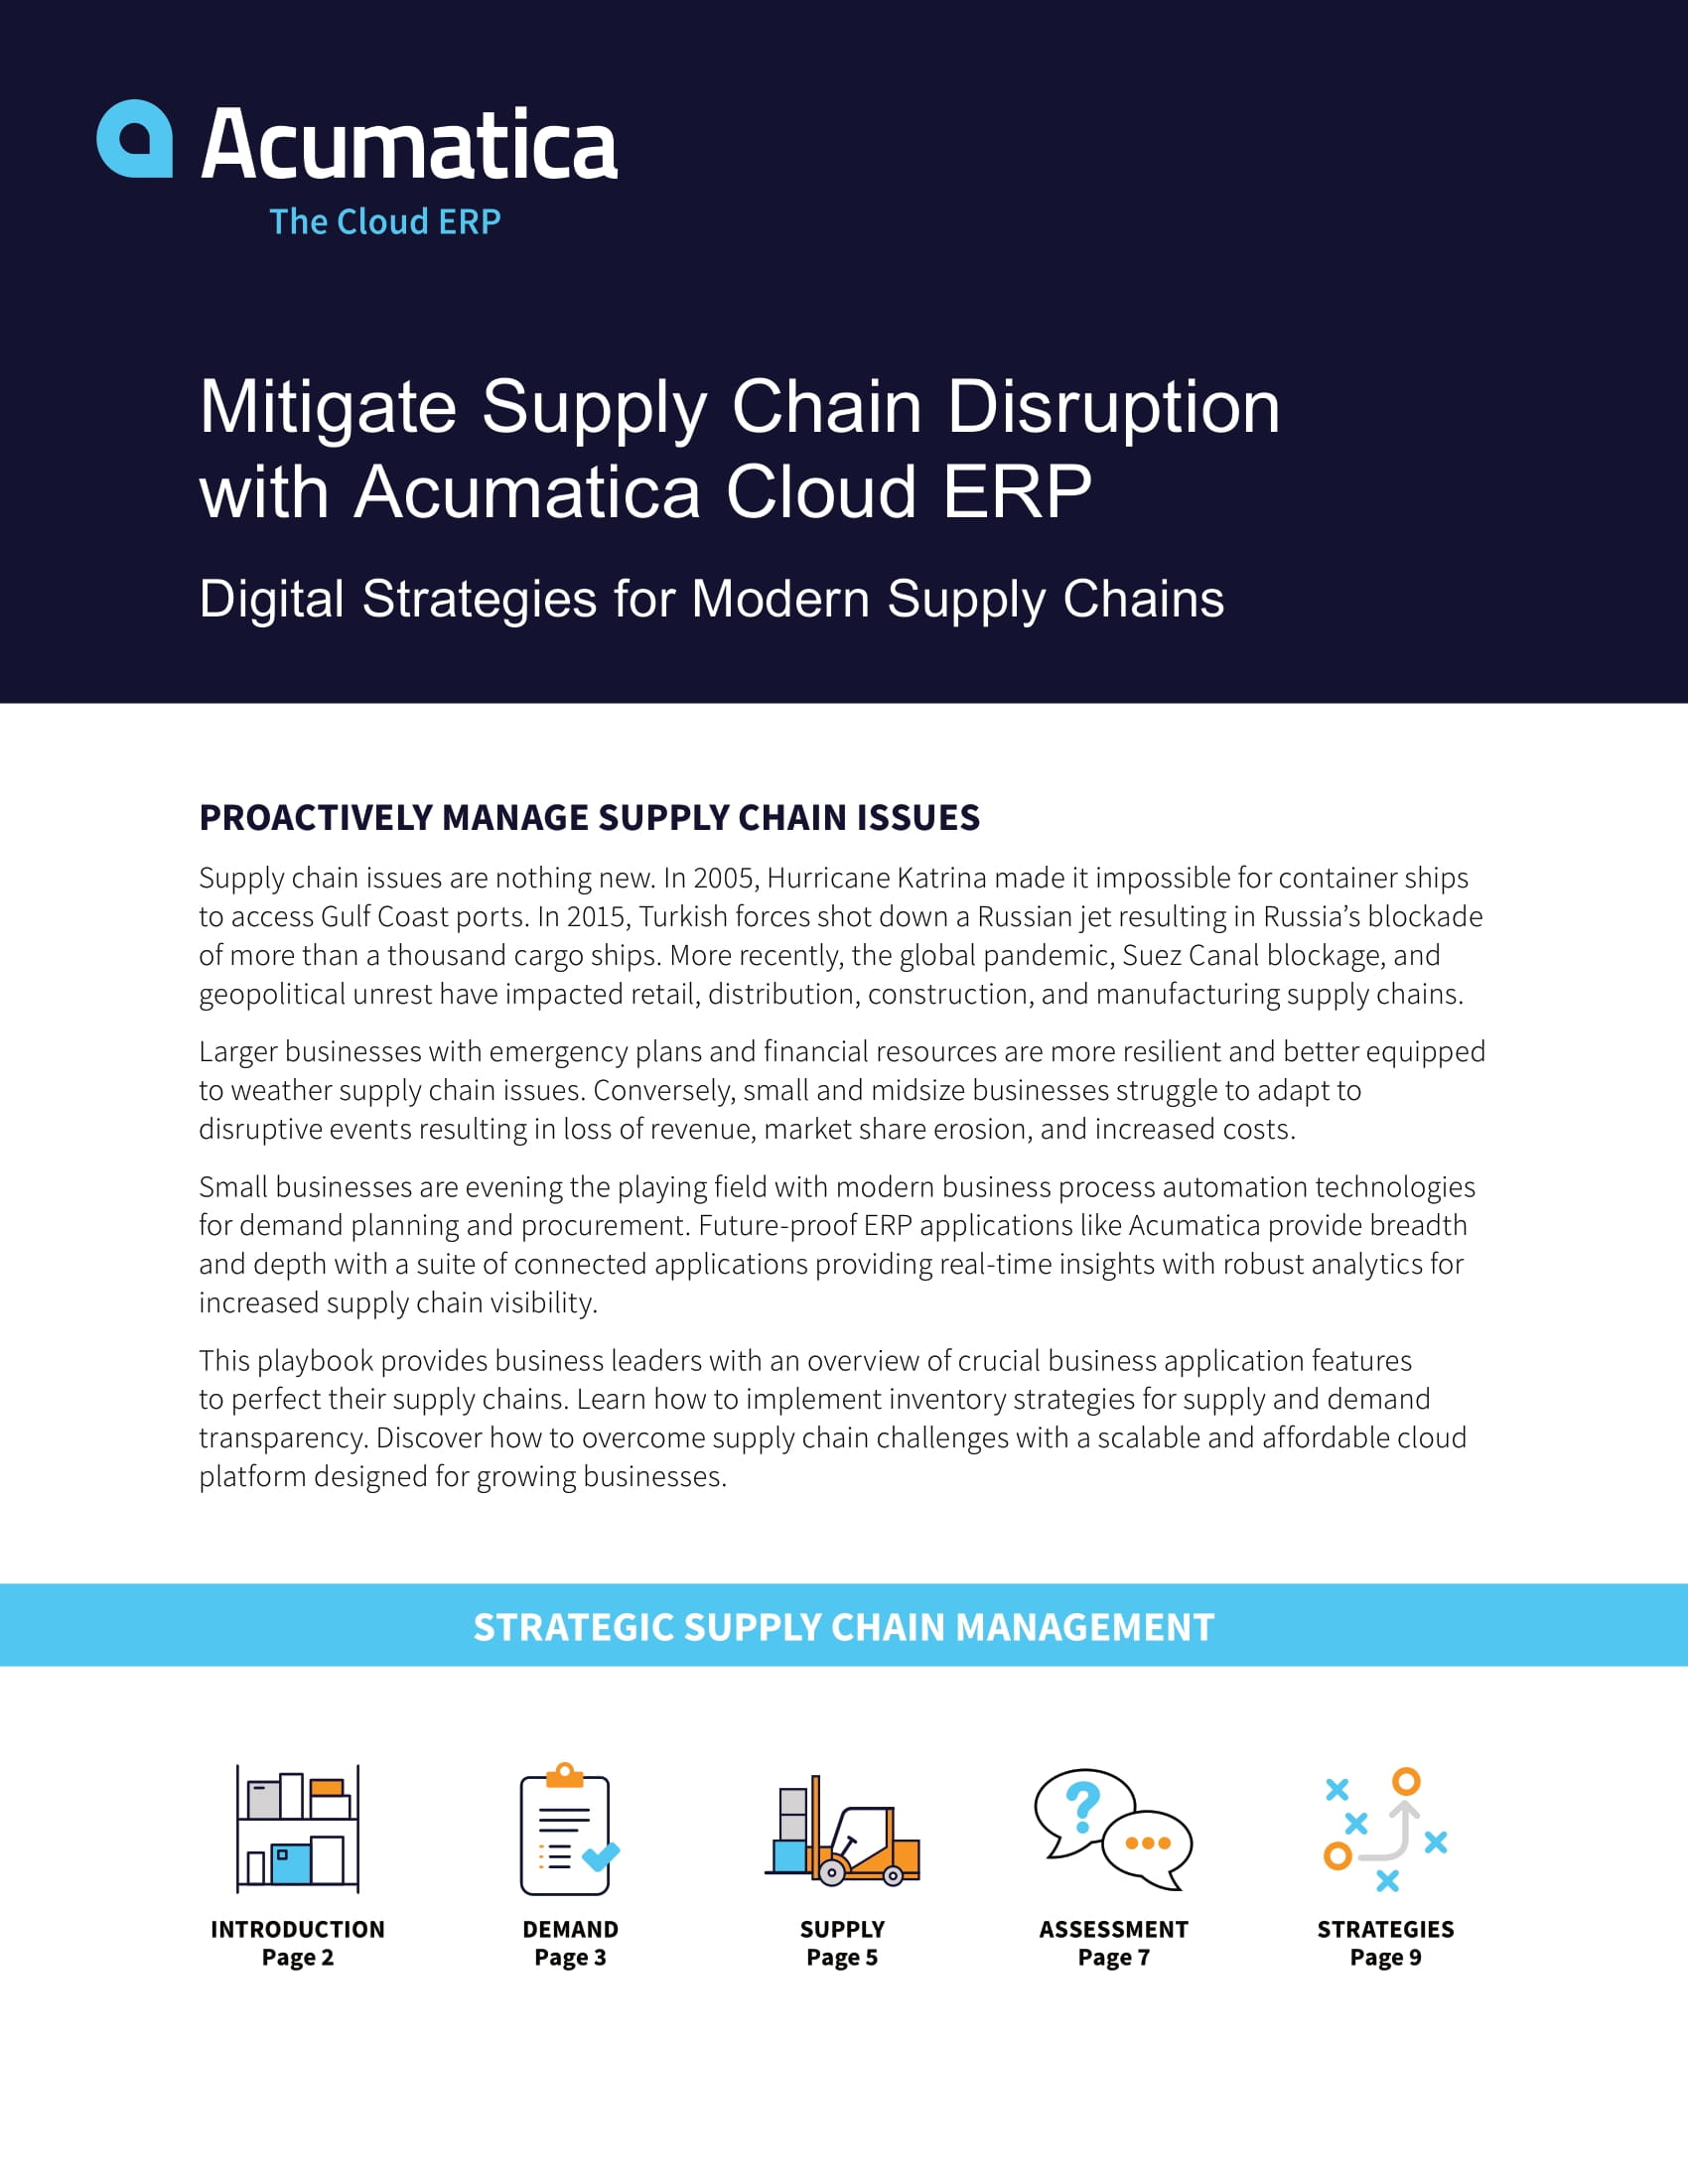 Managing Supply Chain Disruptions With Acumatica Cloud ERP, page 0